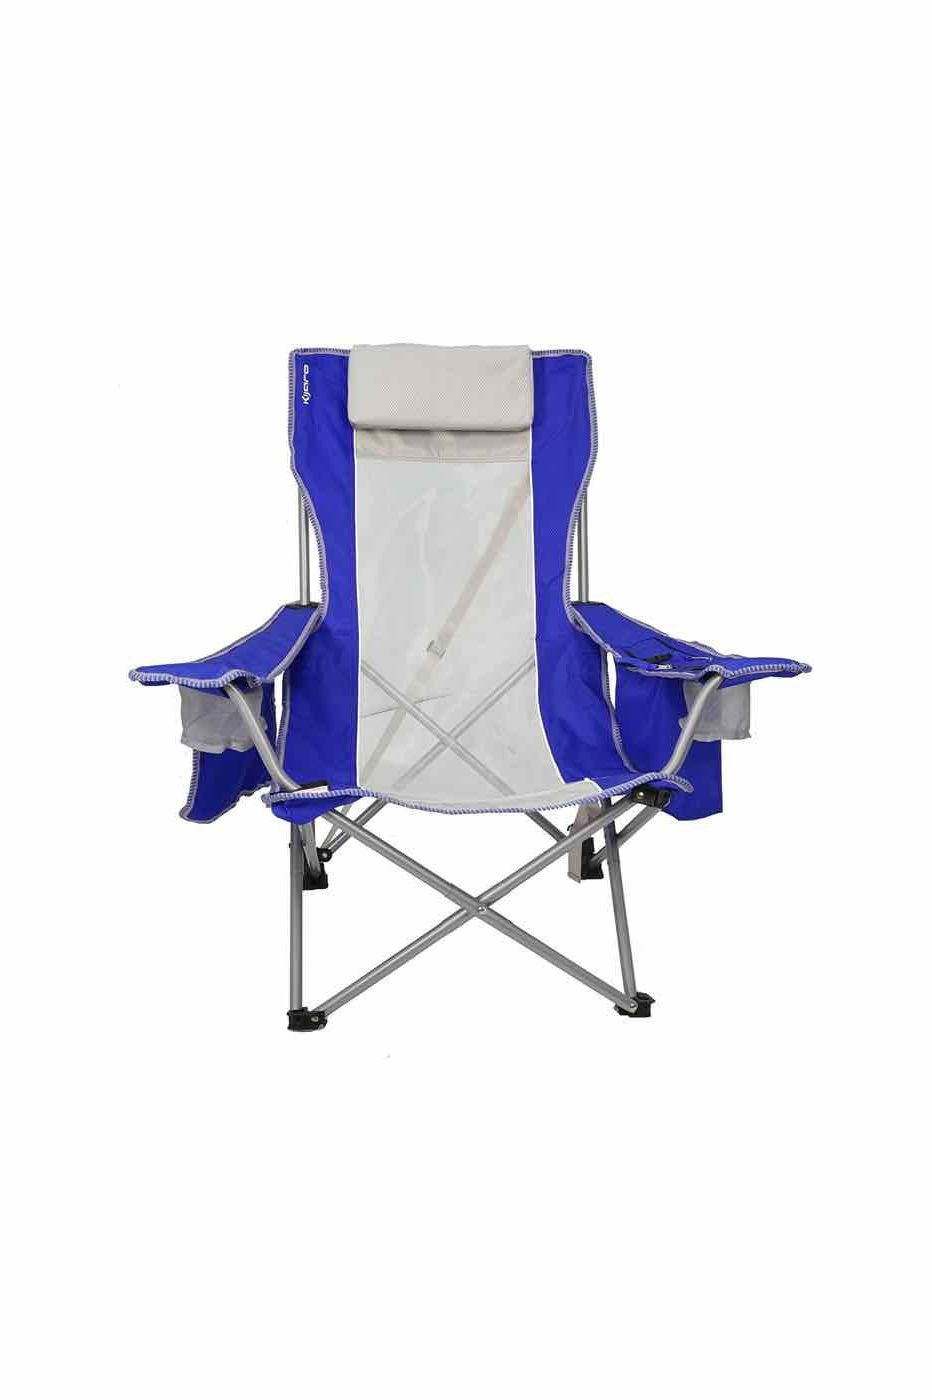 Coast Folding Beach Sling Chair with Cooler